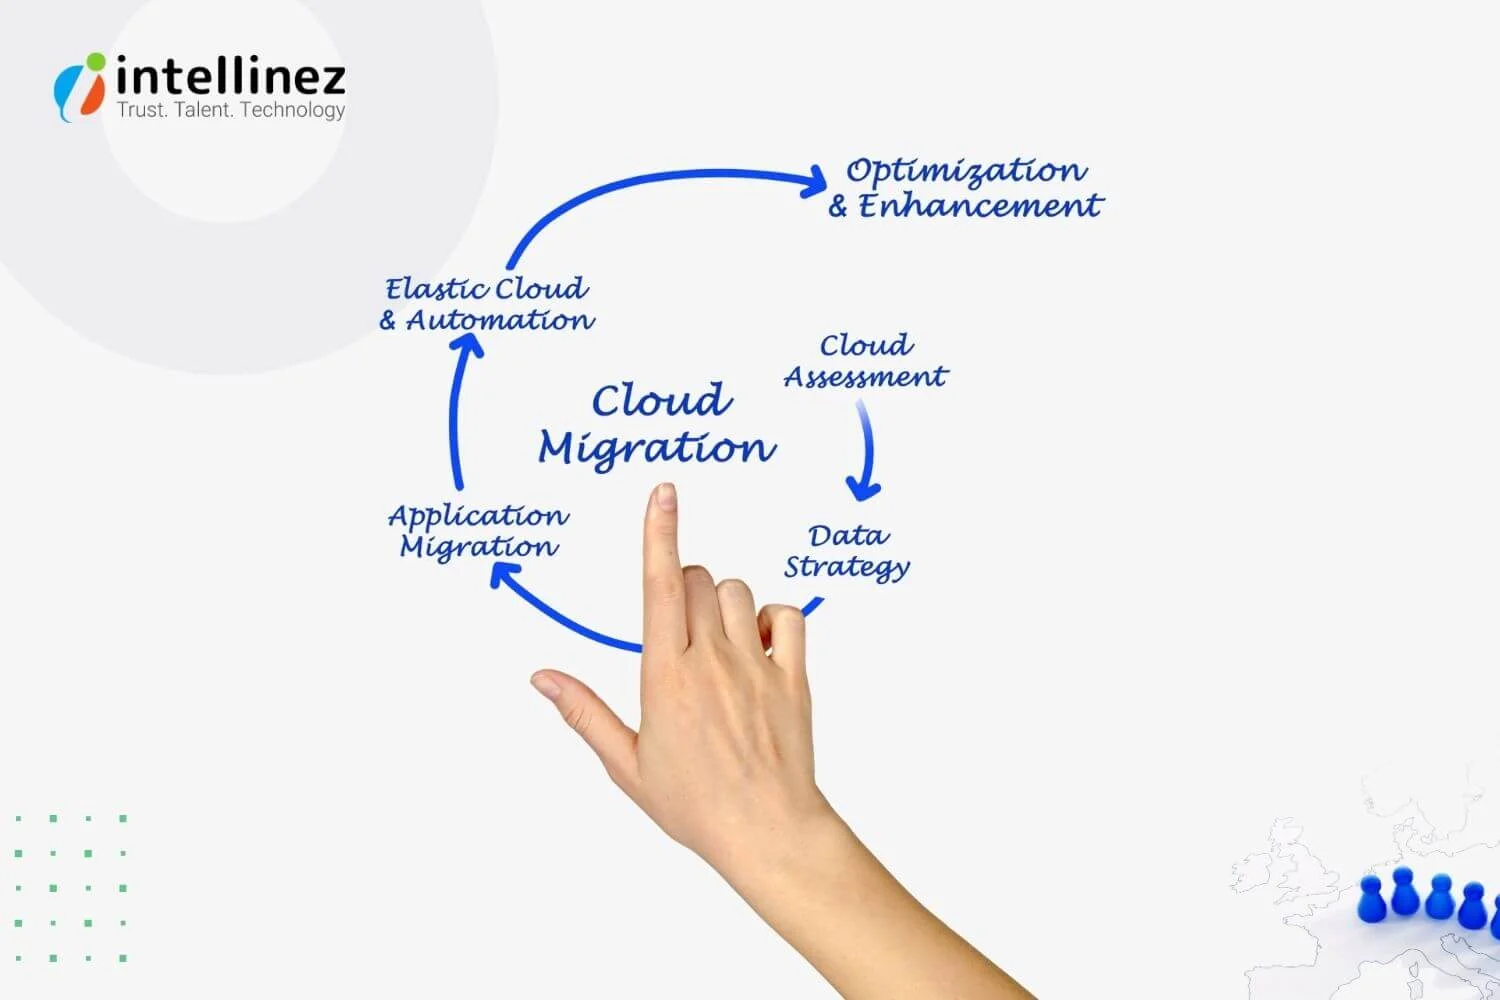 What is the process of cloud migration